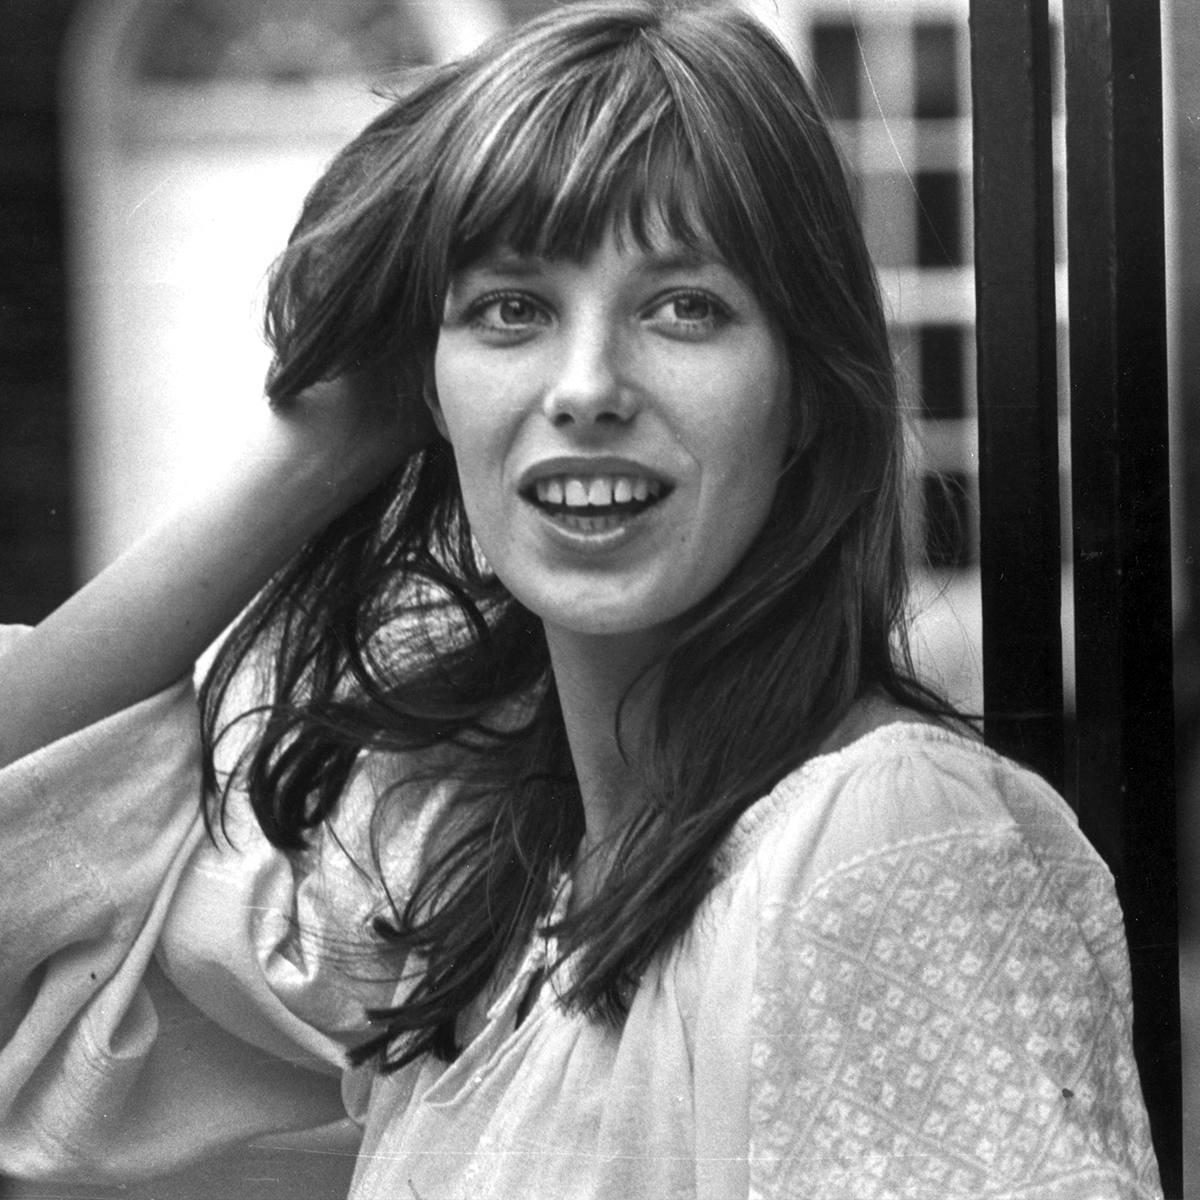 Jane Birkin Honored by Fans, Friends and Family at Paris Funeral